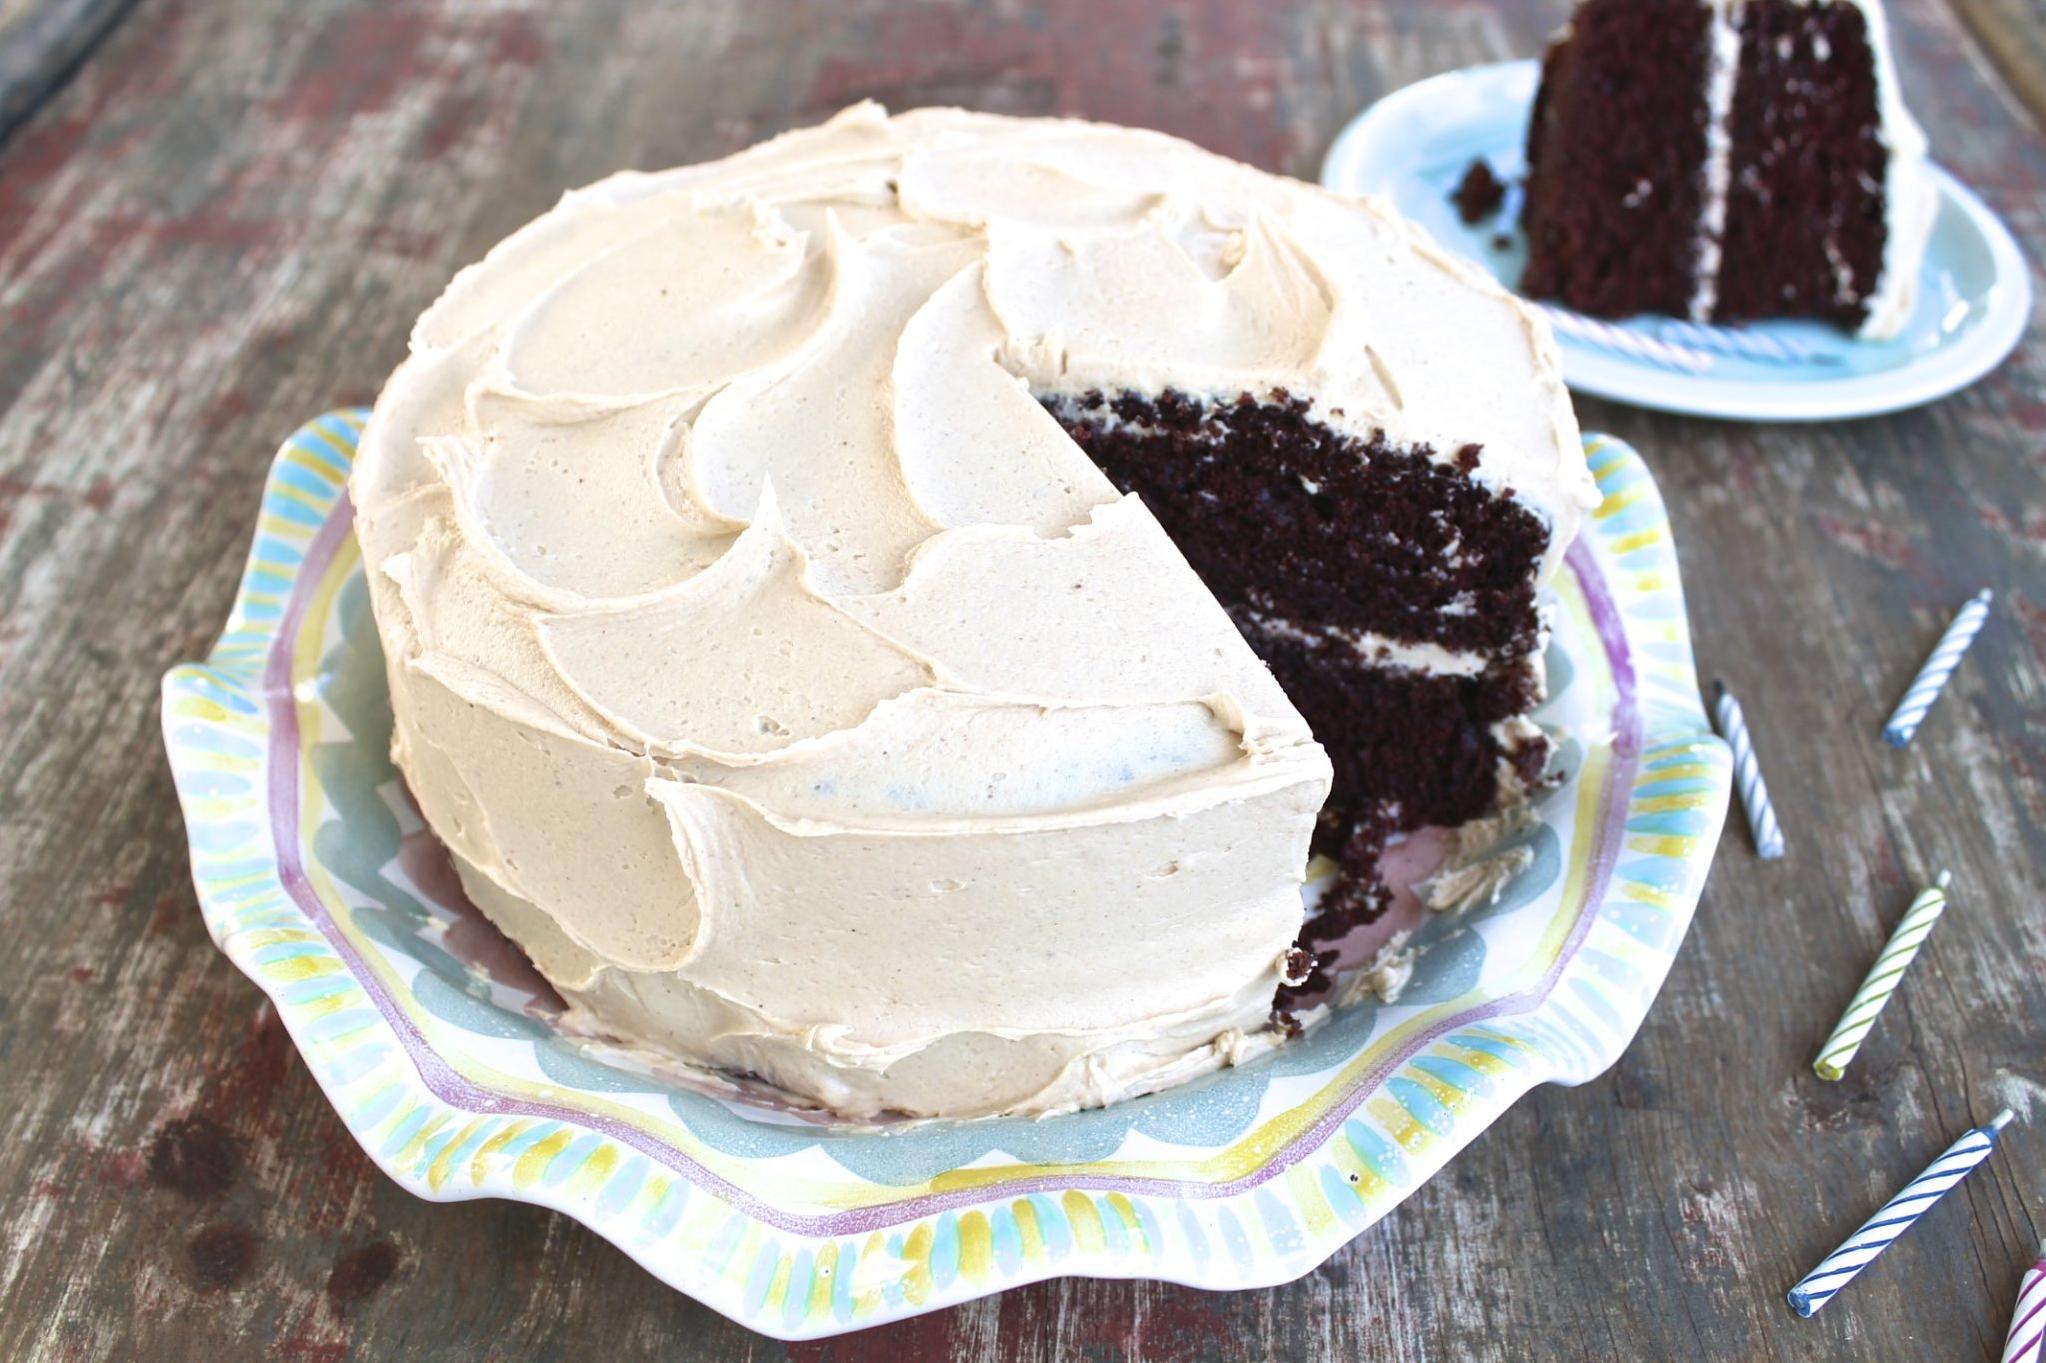  Get ready to pucker up with this sweet Hershey's Kisses Coffee Cake